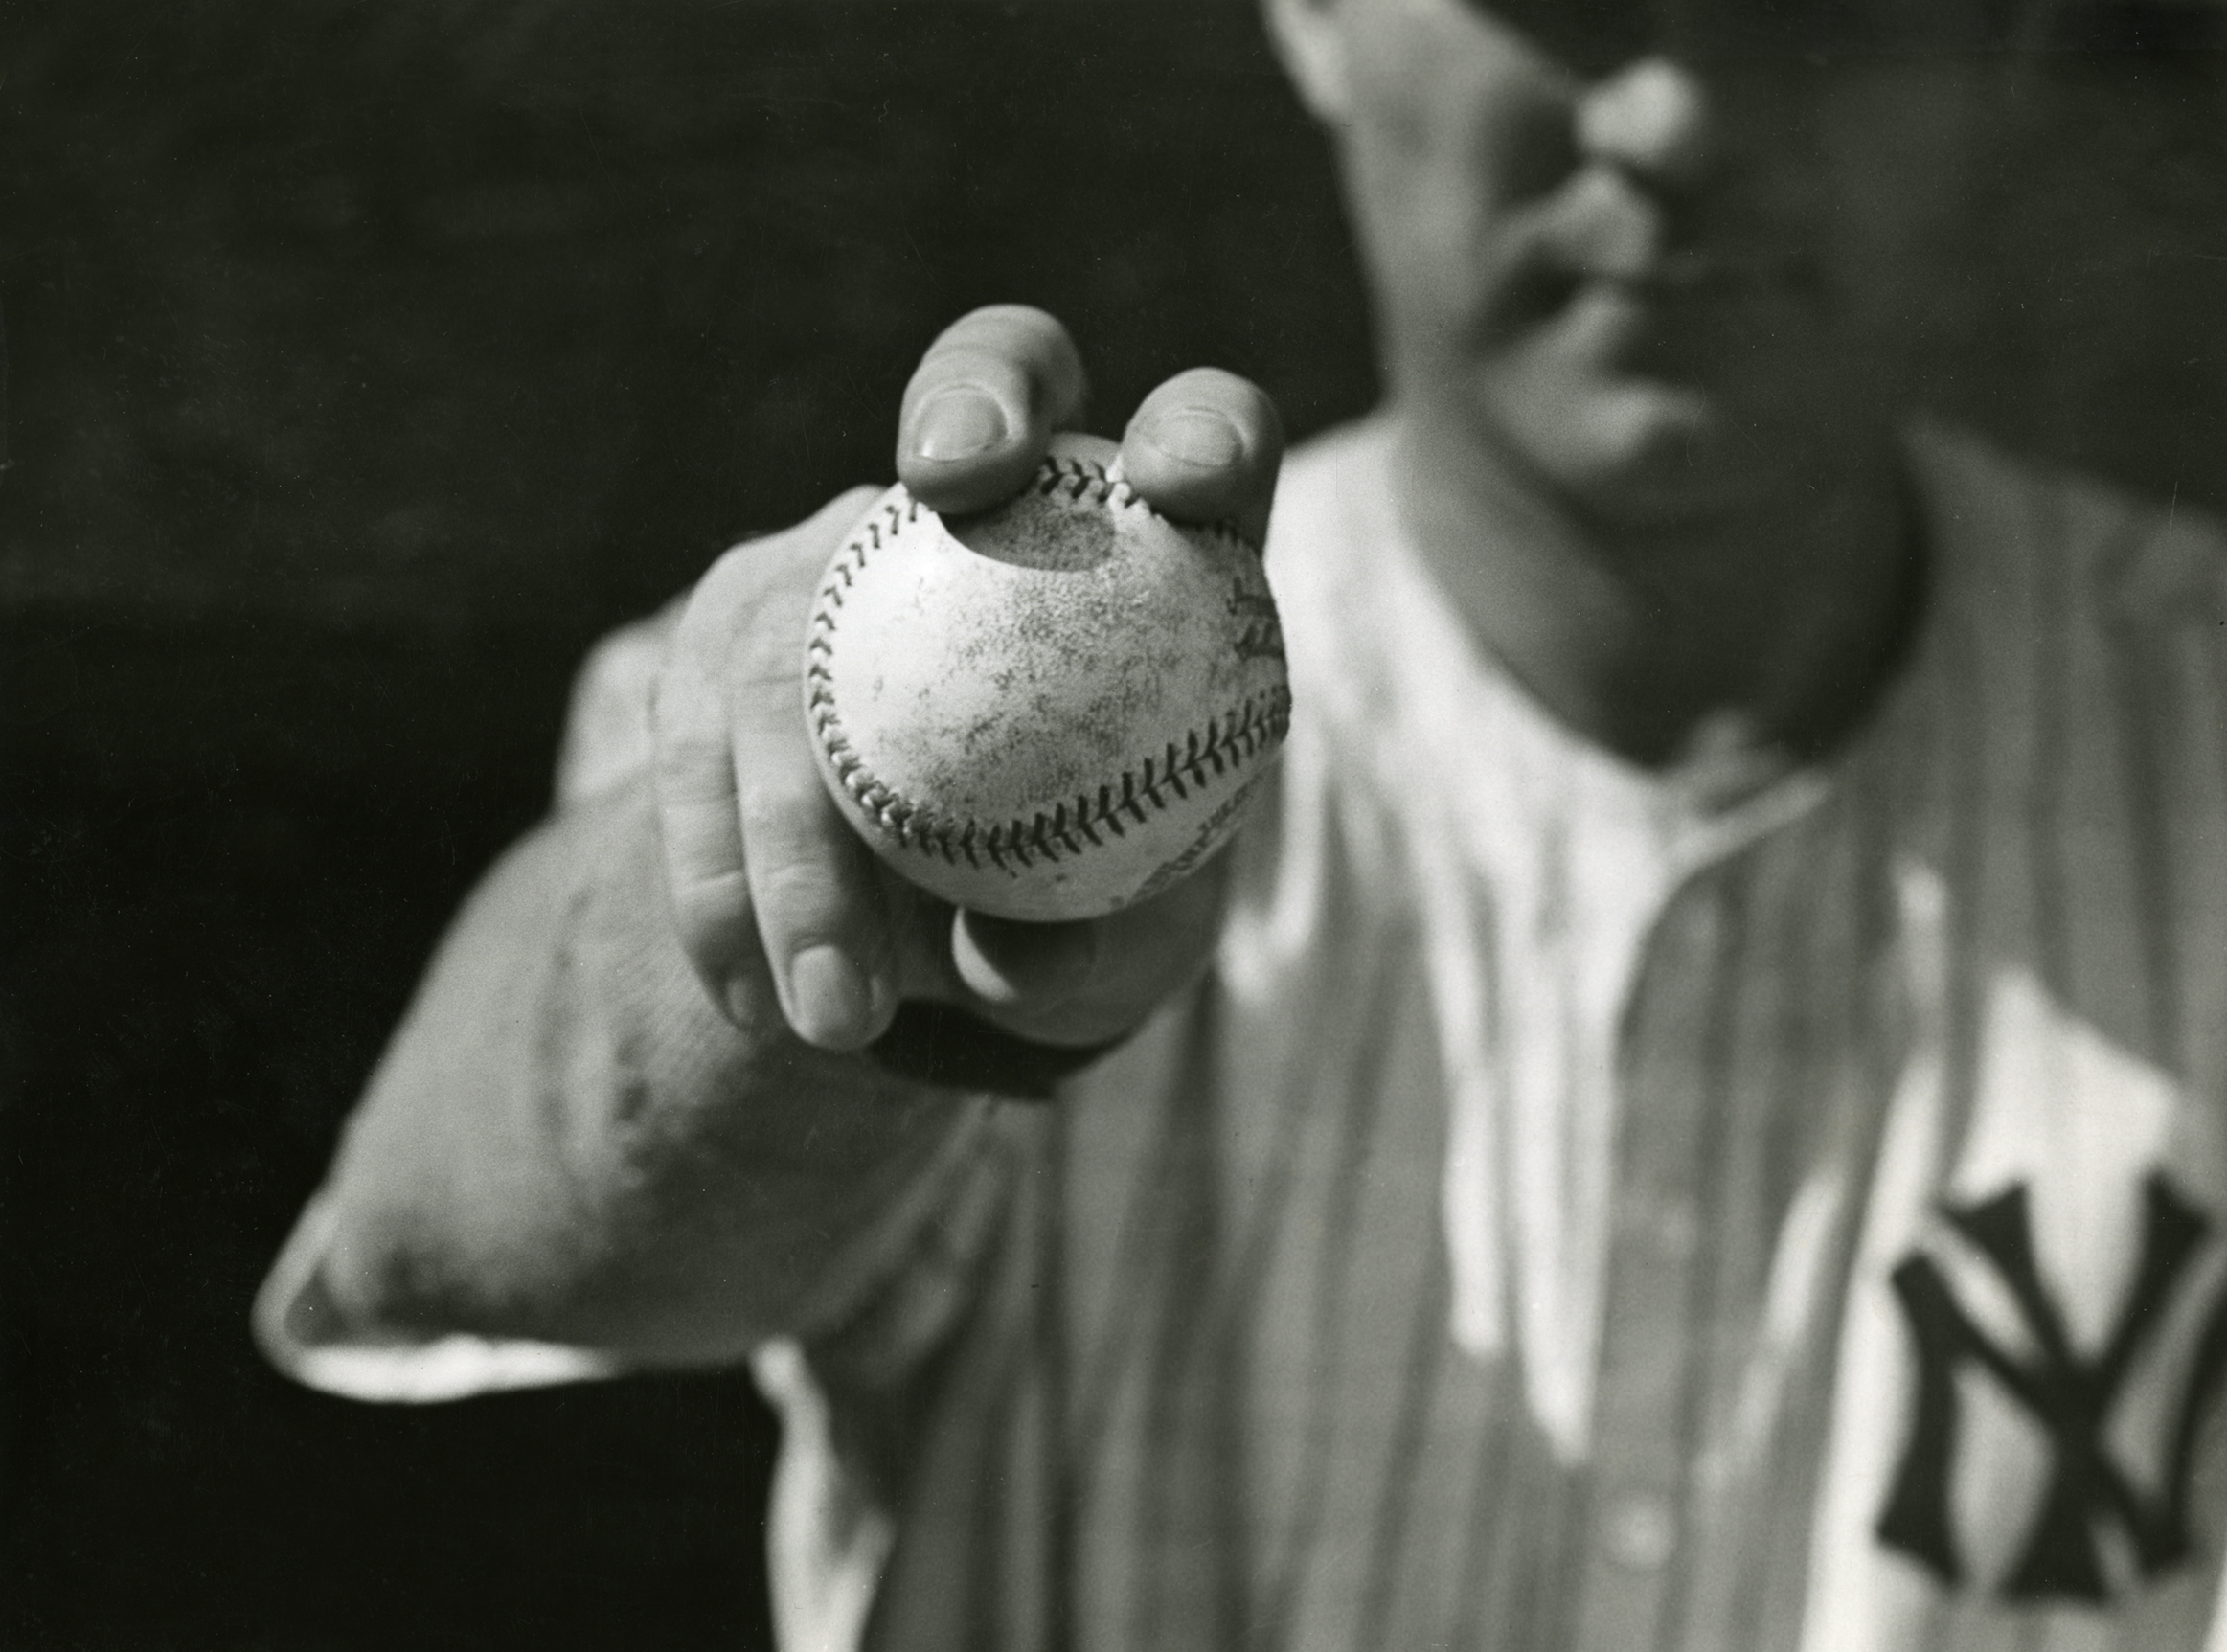 New York Yankees pitcher Red Ruffing shows off his fastball grip, 1938.